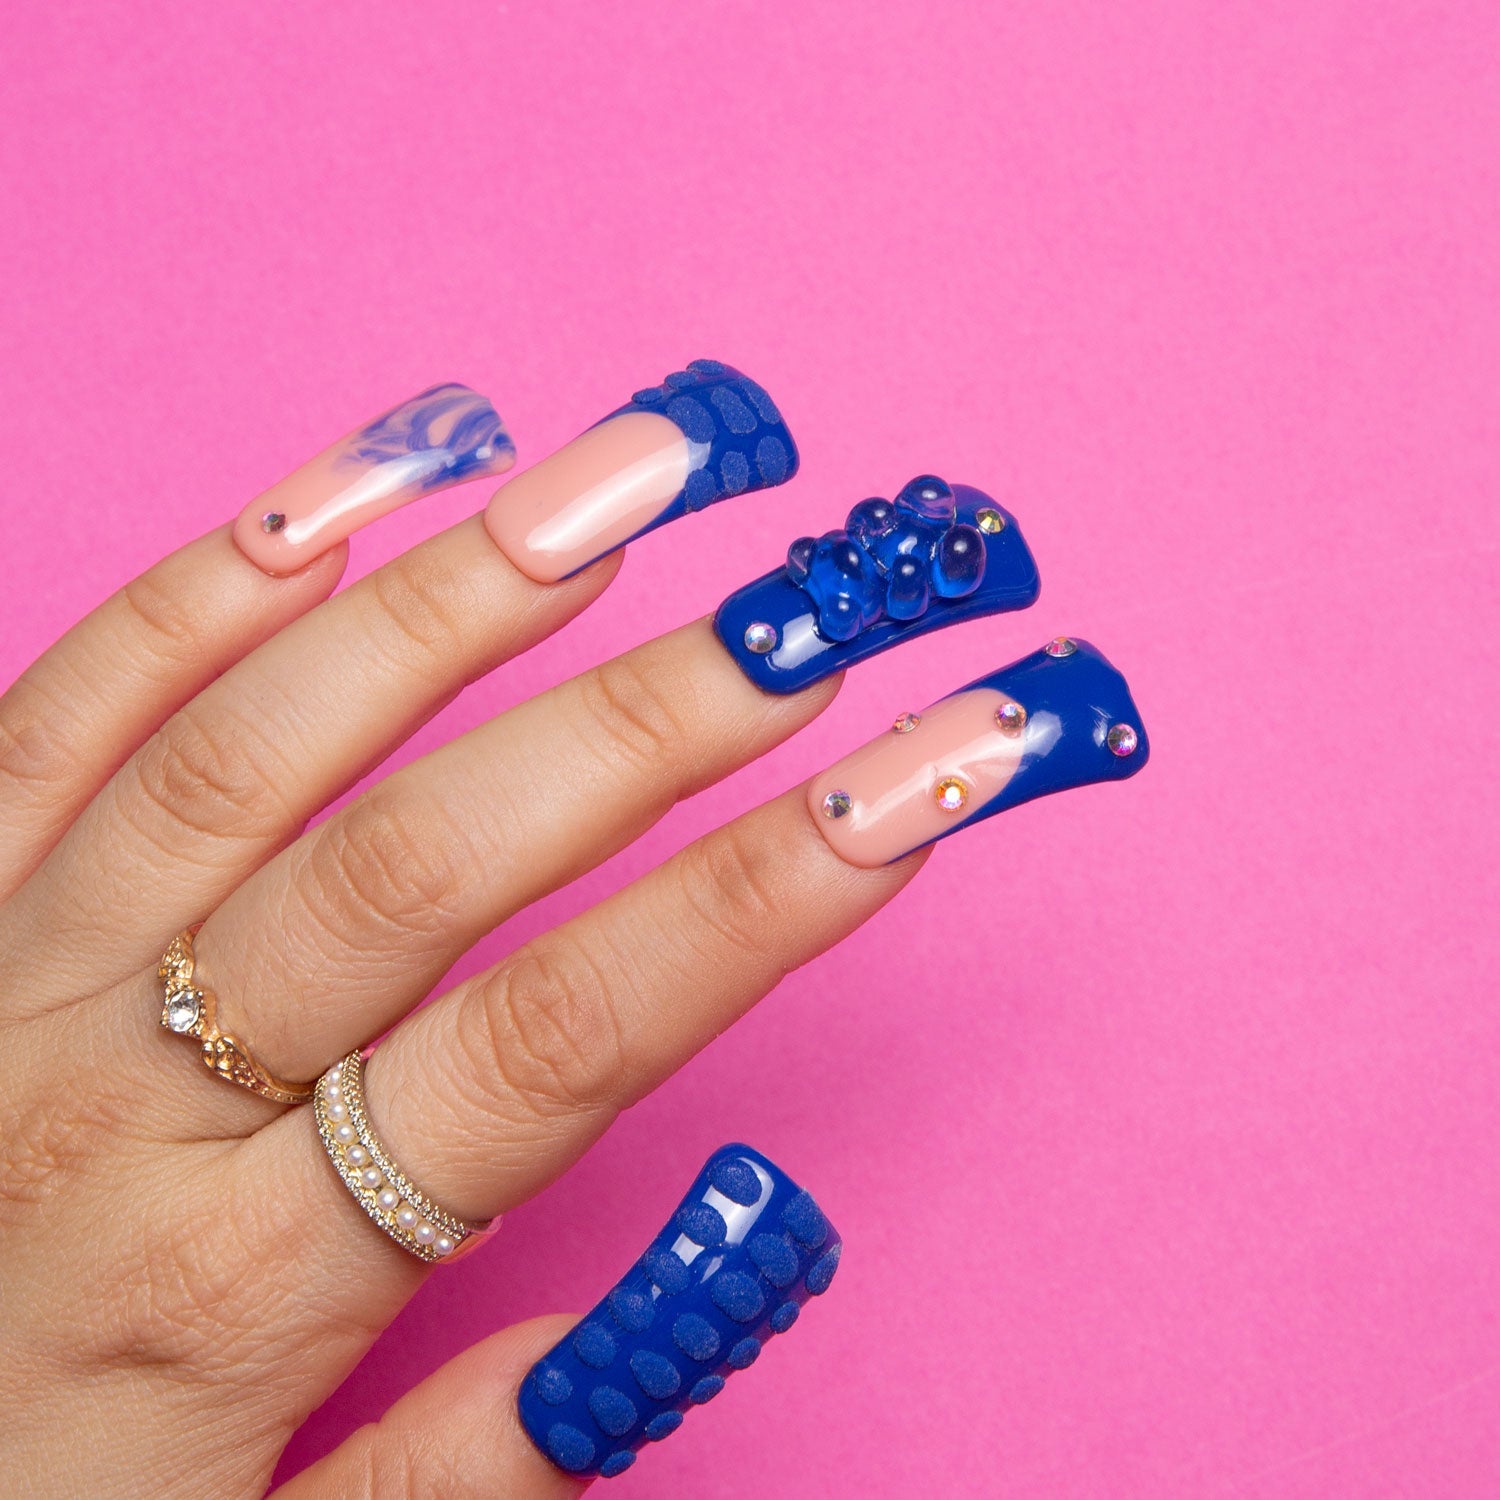 A hand with Little Blue Bear Rhinestone French tip nails, featuring blue hue, 3D gummy bears, shiny rhinestones, and hand-drawn 3D dots against a pink background.